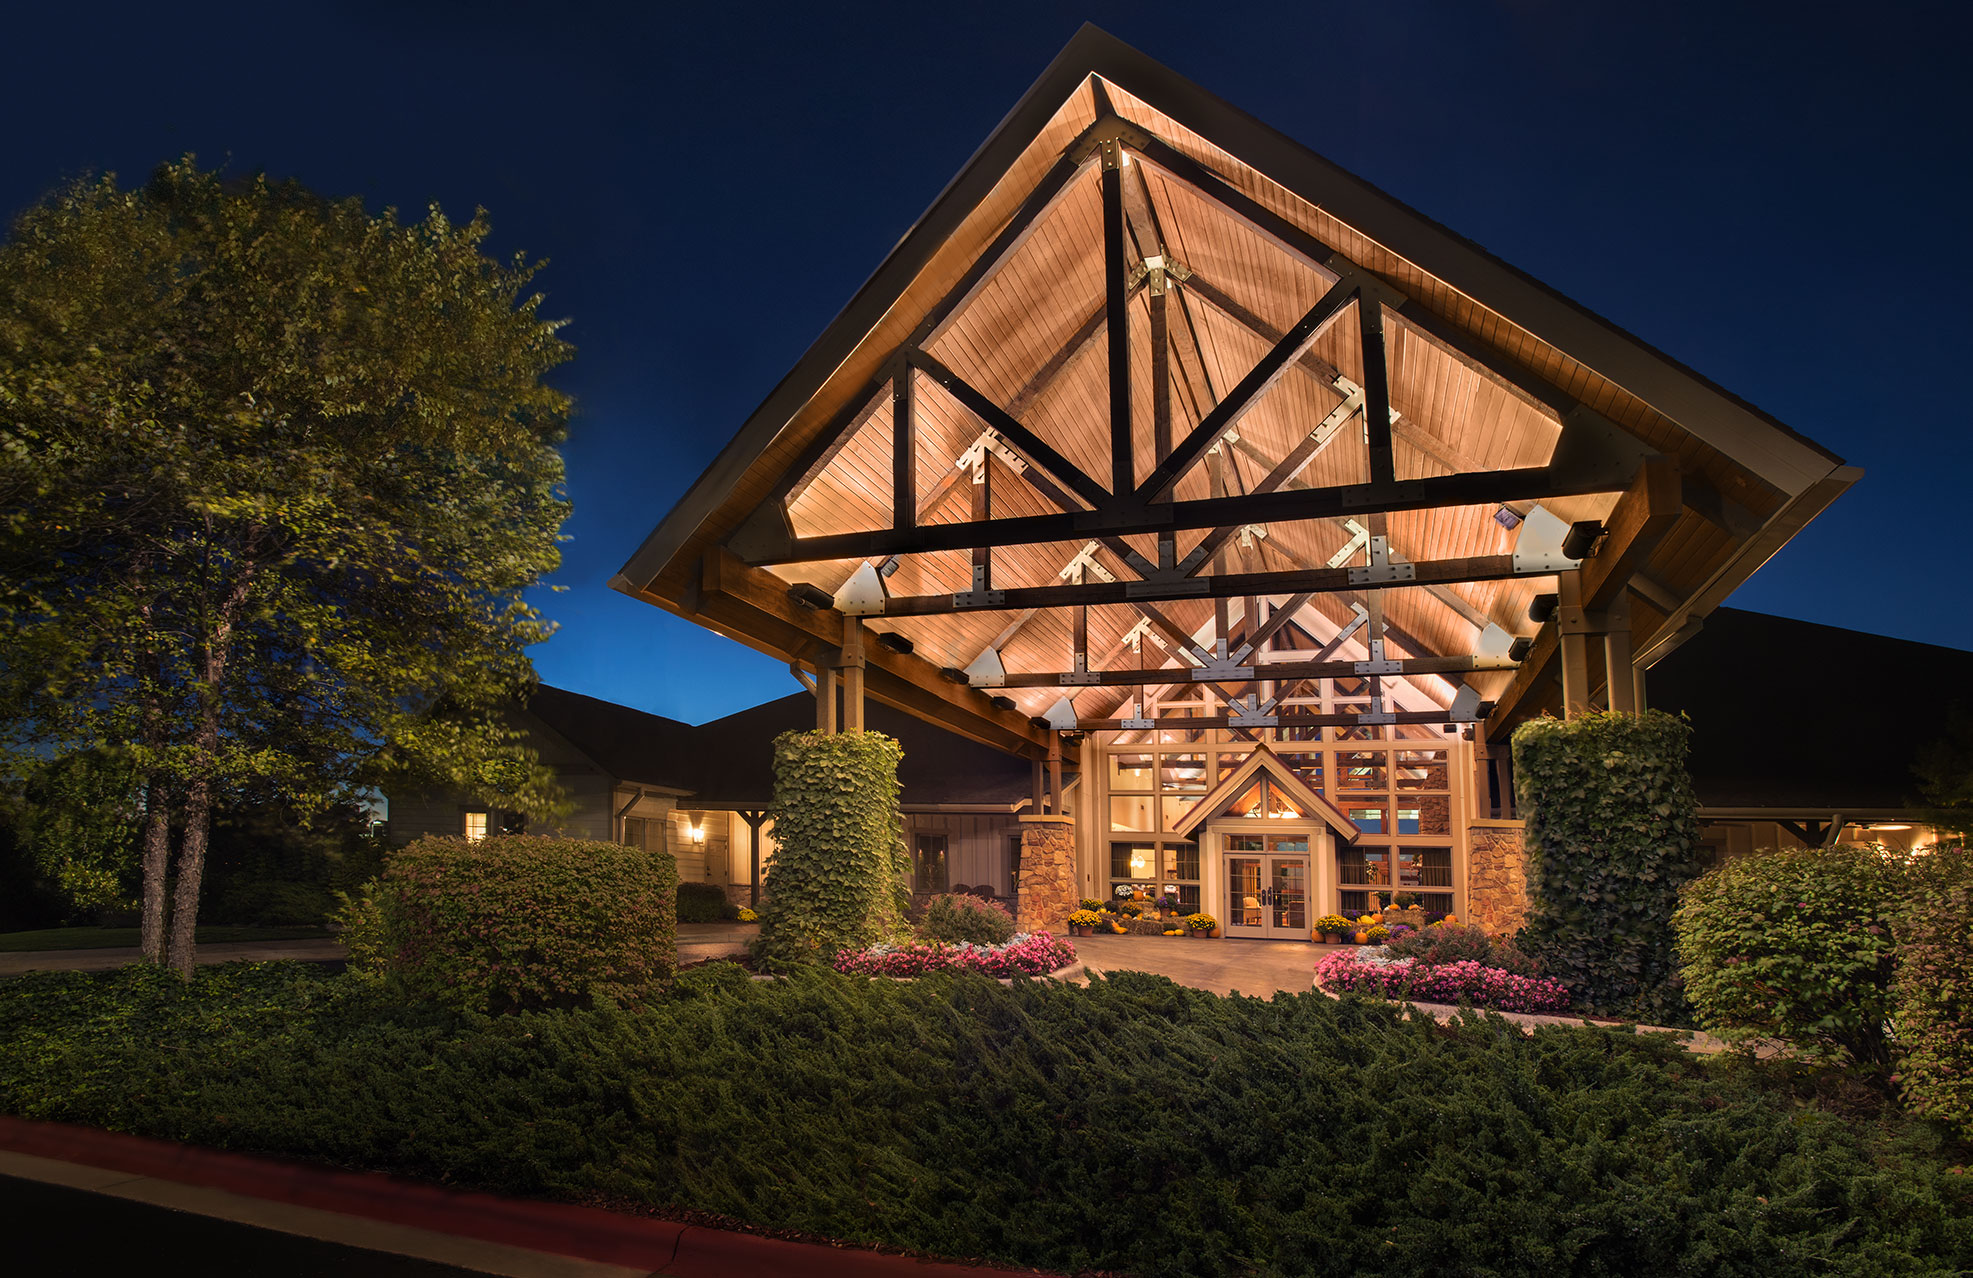 Dramatic exterior entrance to Marriott's Willow Ridge Lodge with gabled wood roof and stone pillars.